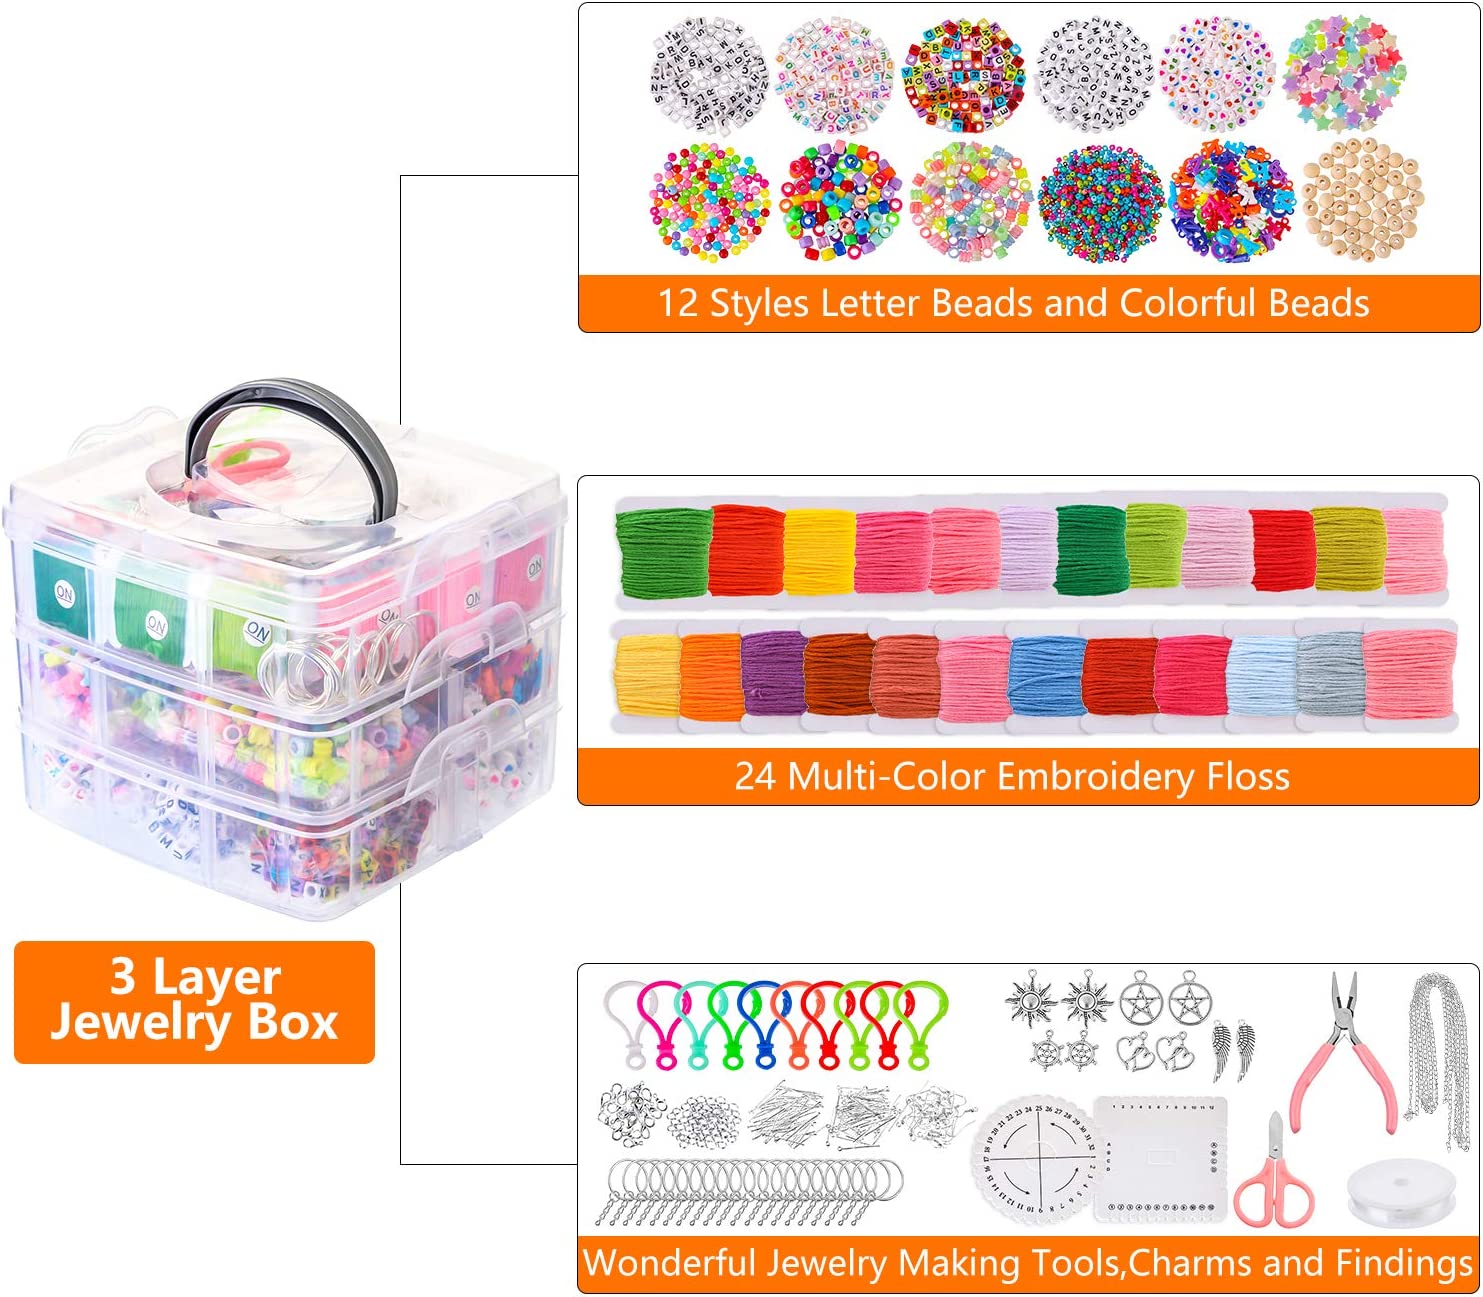 Jewelry Making Kit,Jewelry Making Supplies 4655PCS Include Jewelry Pliers Beading Wire Beads Charms Findings for Necklace Earring Bracelet Repair Jewelry Making Tools Kits for Adults Women - image 2 of 9